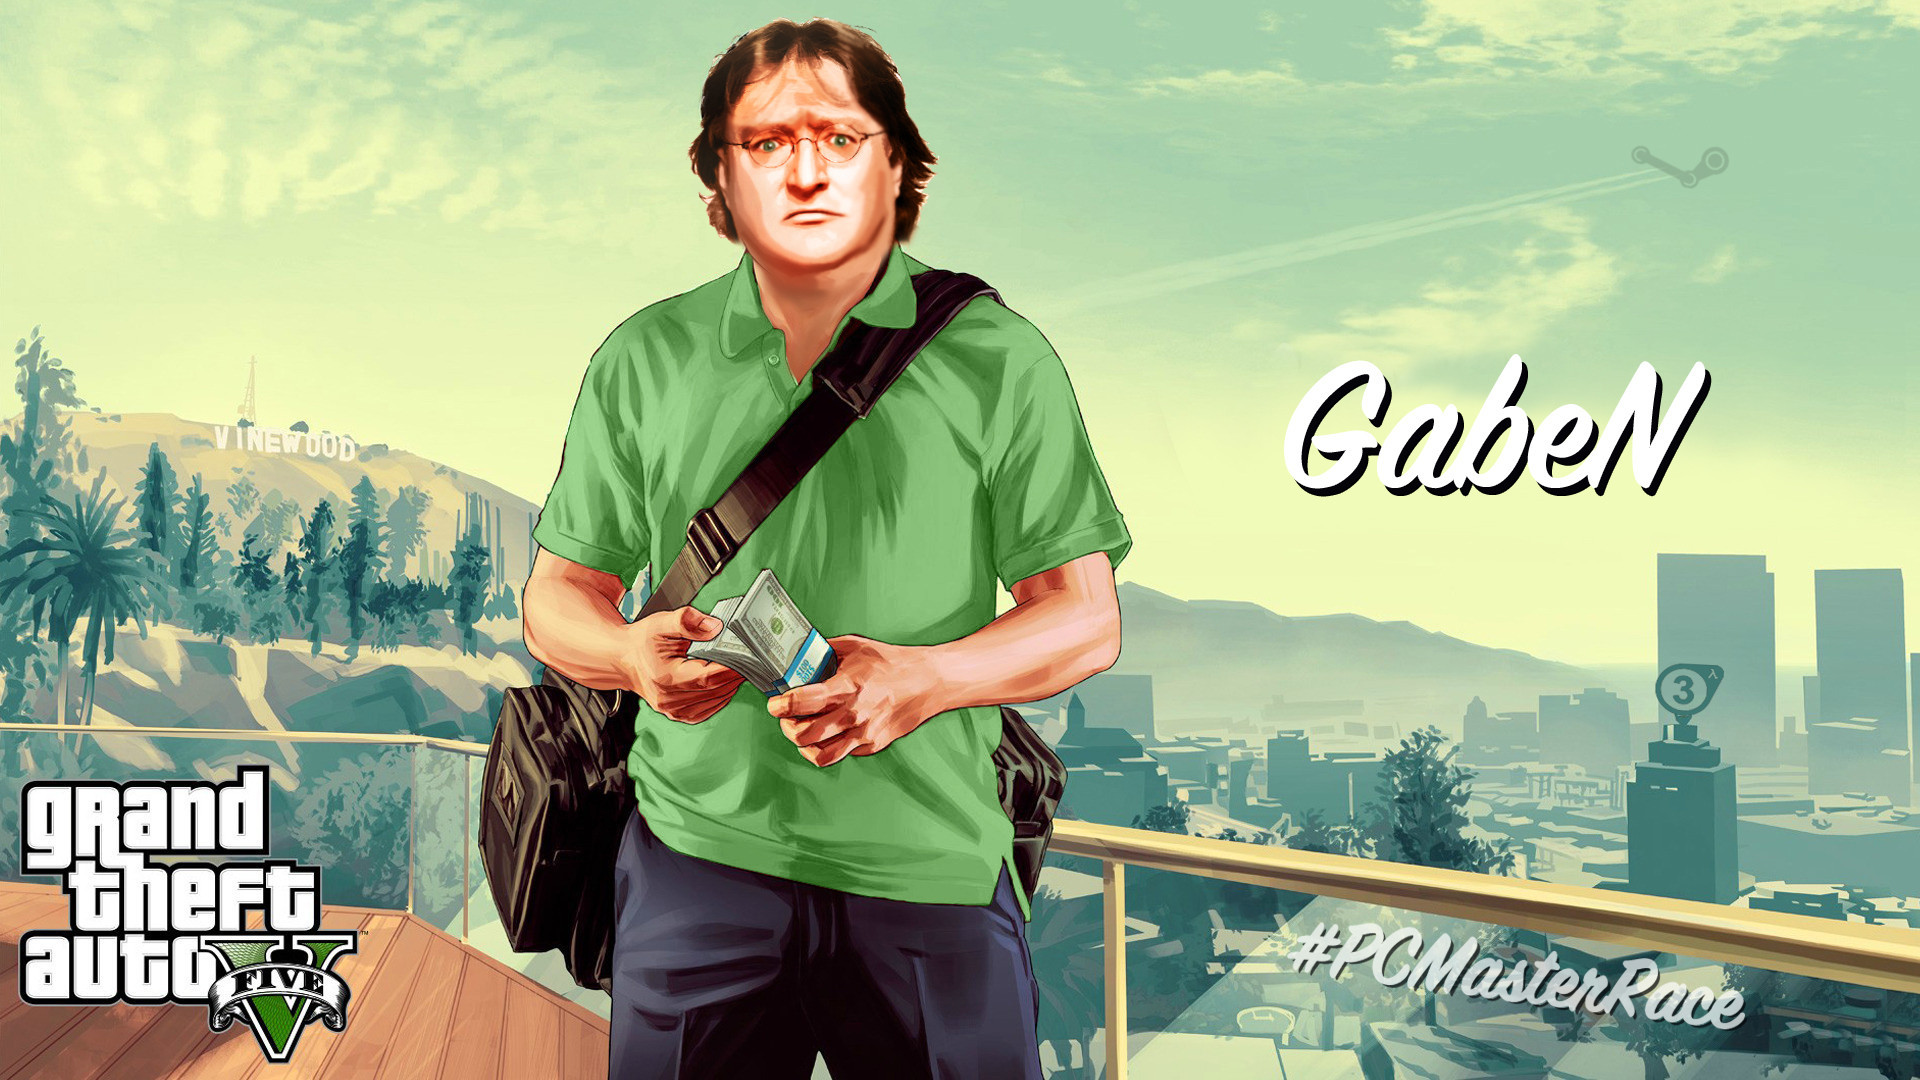 I Made A Glorious Gaben Gta Wallpaper For All Of Our Lord And